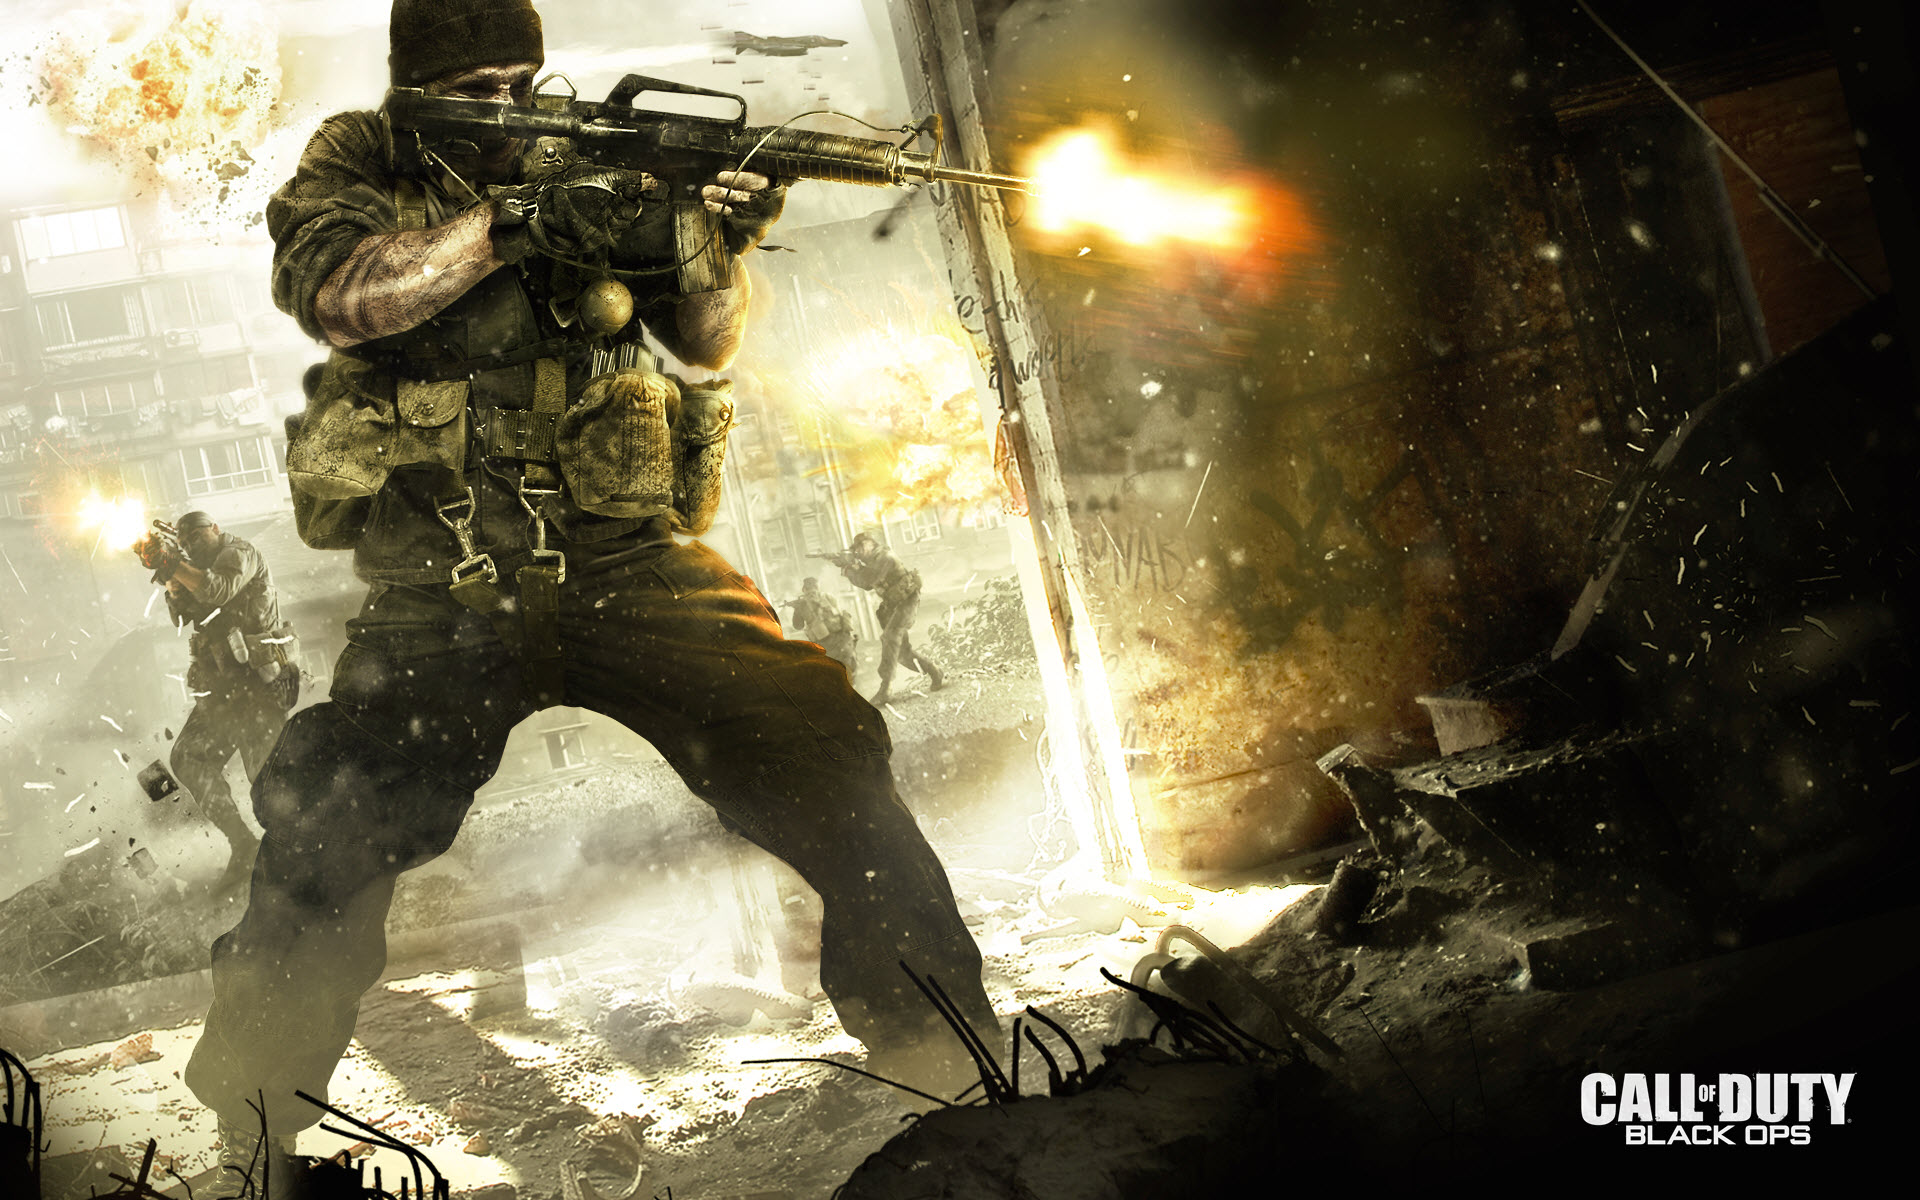 Black Ops Wallpaper 75 pictures